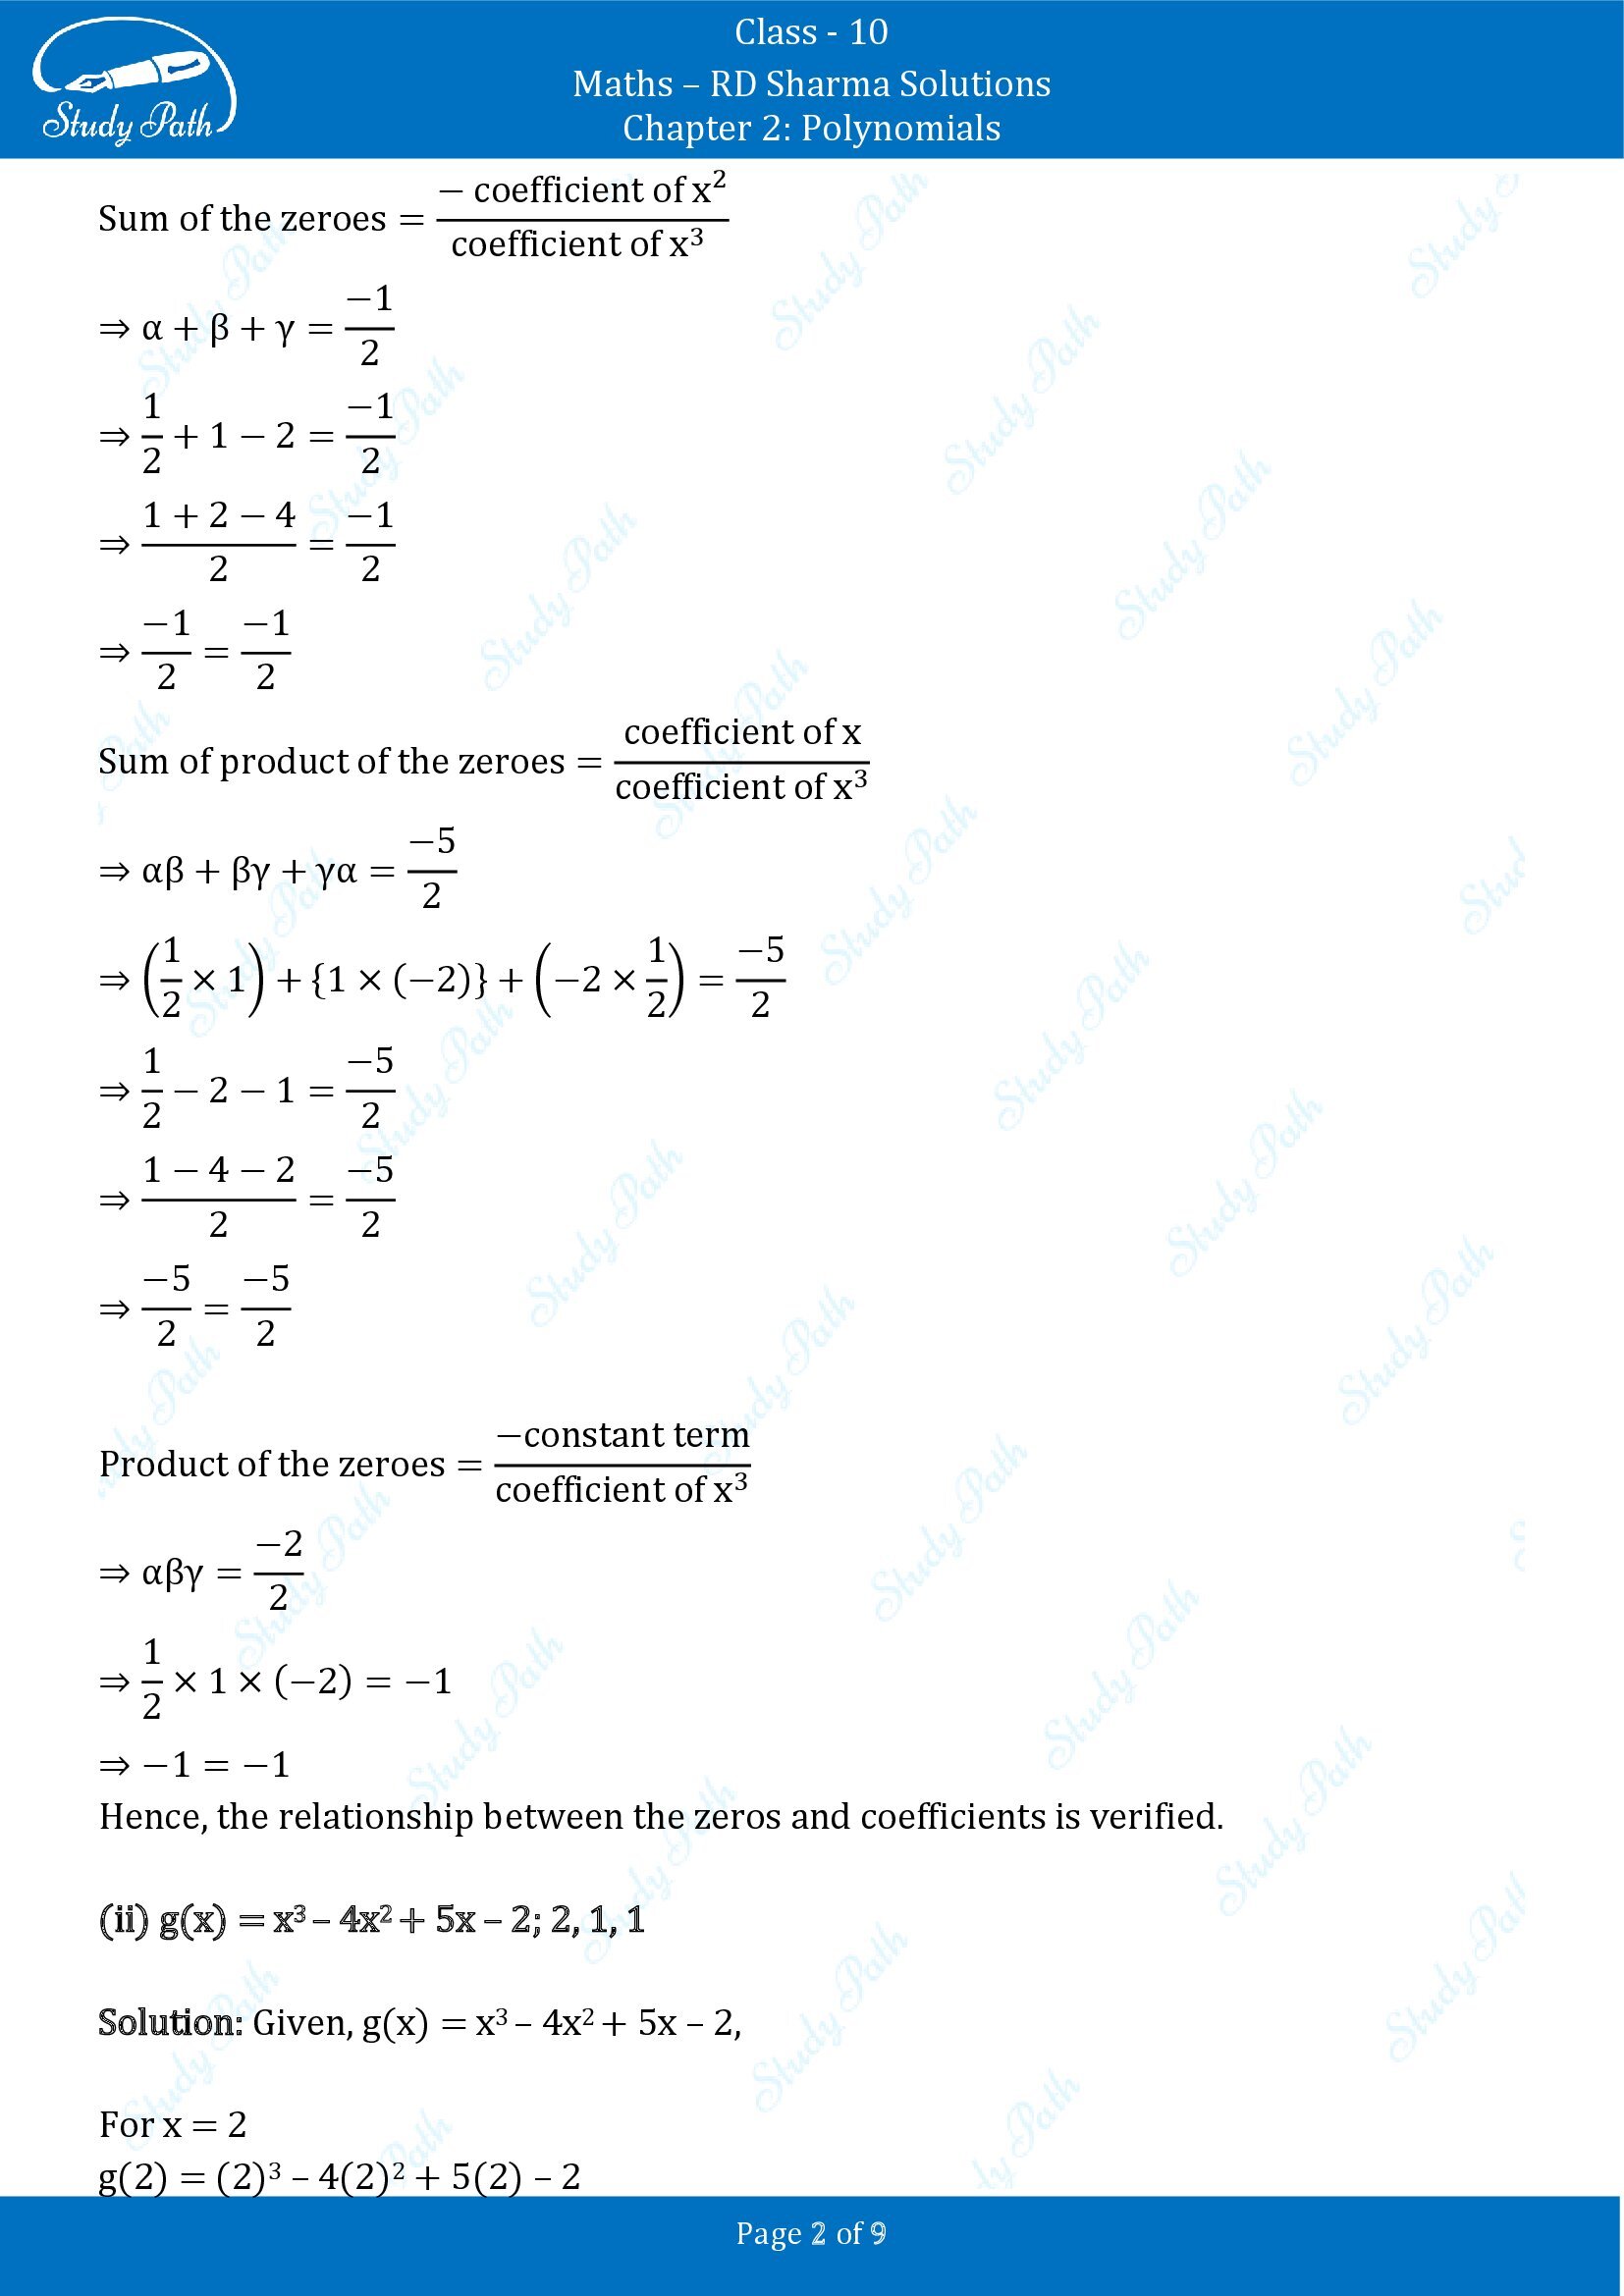 RD Sharma Solutions Class 10 Chapter 2 Polynomials Exercise 2.2 00002